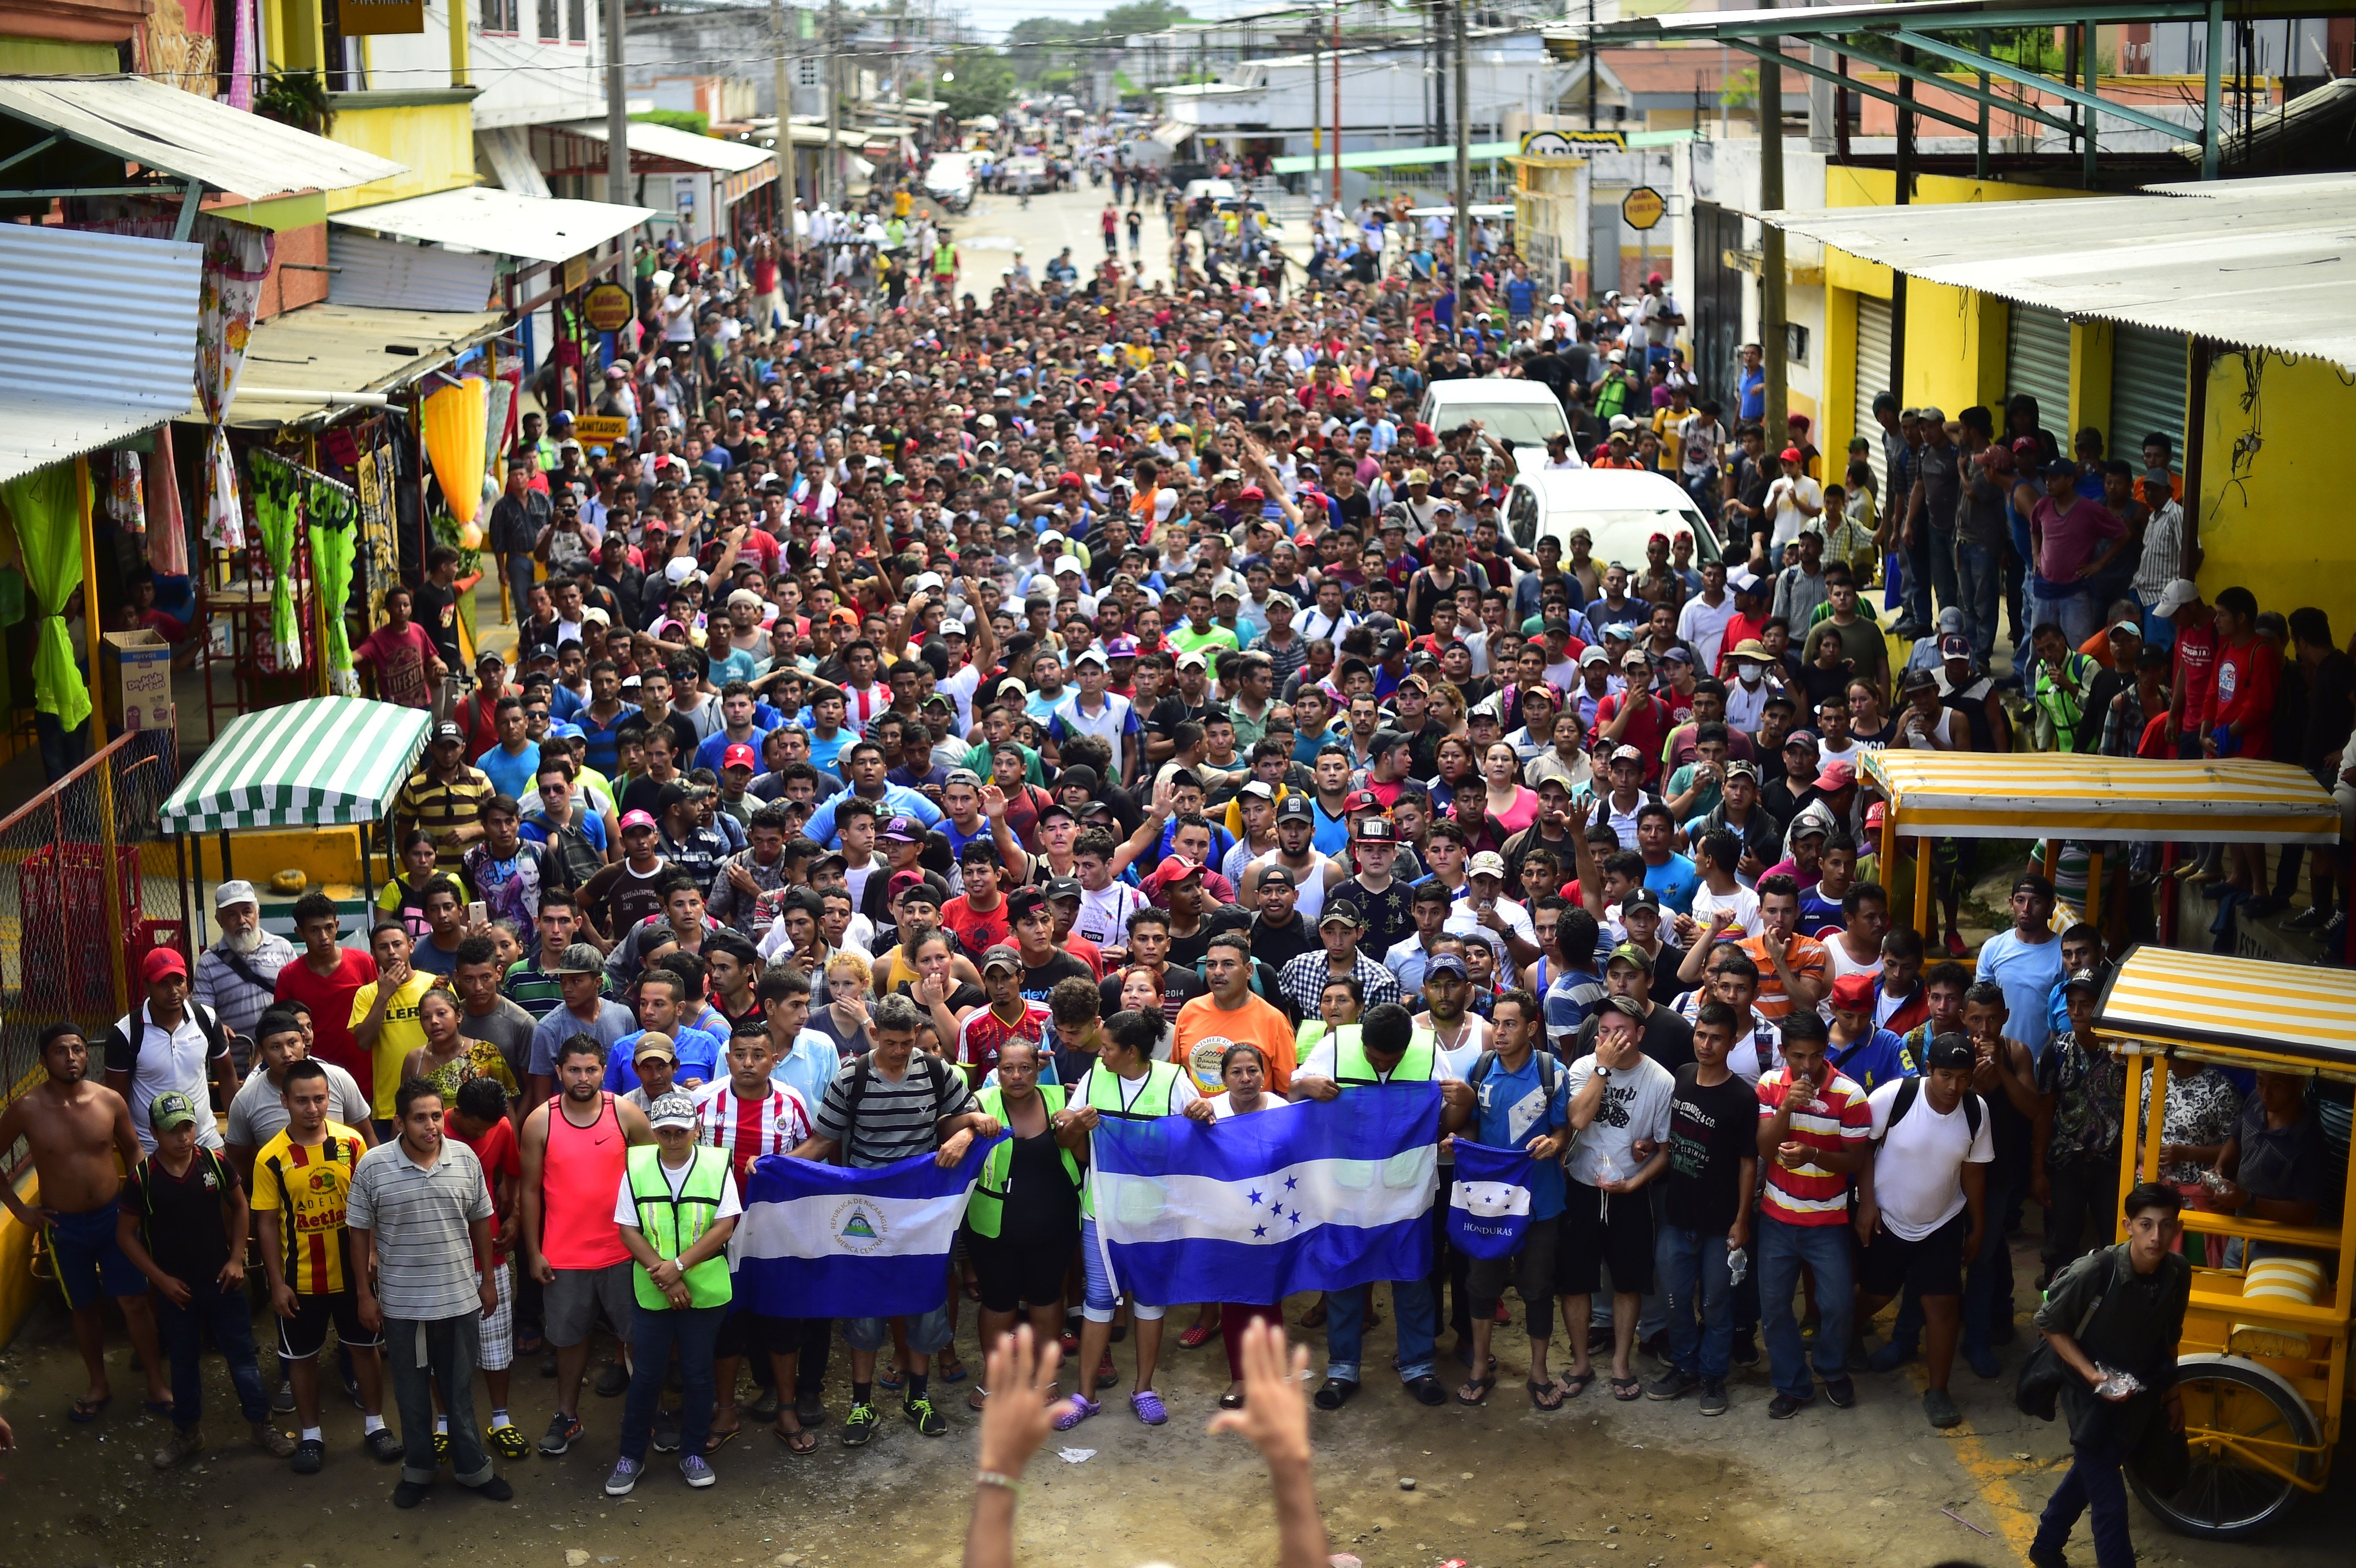 TOPSHOT - Honduran migrants heading in a caravan to the US, hold a demonstration demanding authorities to allow the rest of the group to cross, in Ciudad Hidalgo, Chiapas state, Mexico after crossing from Guatemala, on October 20, 2018. - Thousands of migrants who forced their way through Guatemala's northwestern border and flooded onto a bridge leading to Mexico, where riot police battled them back, on Saturday waited at the border in the hope of continuing their journey to the United States. (Photo by Pedro Pardo / AFP) 